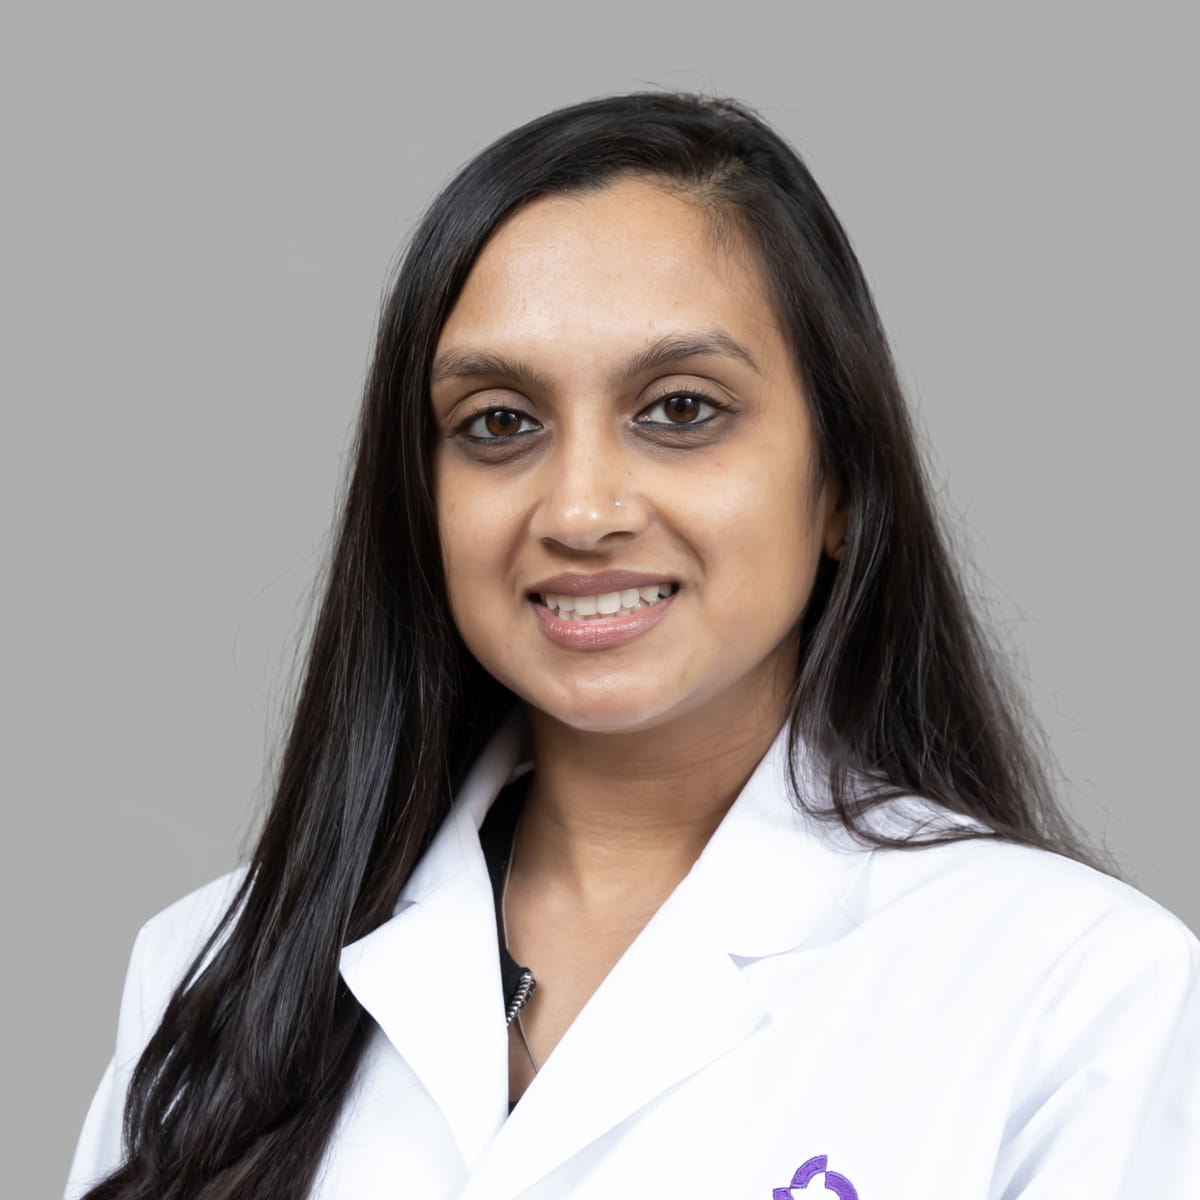 A friendly image of Neety Patel MD